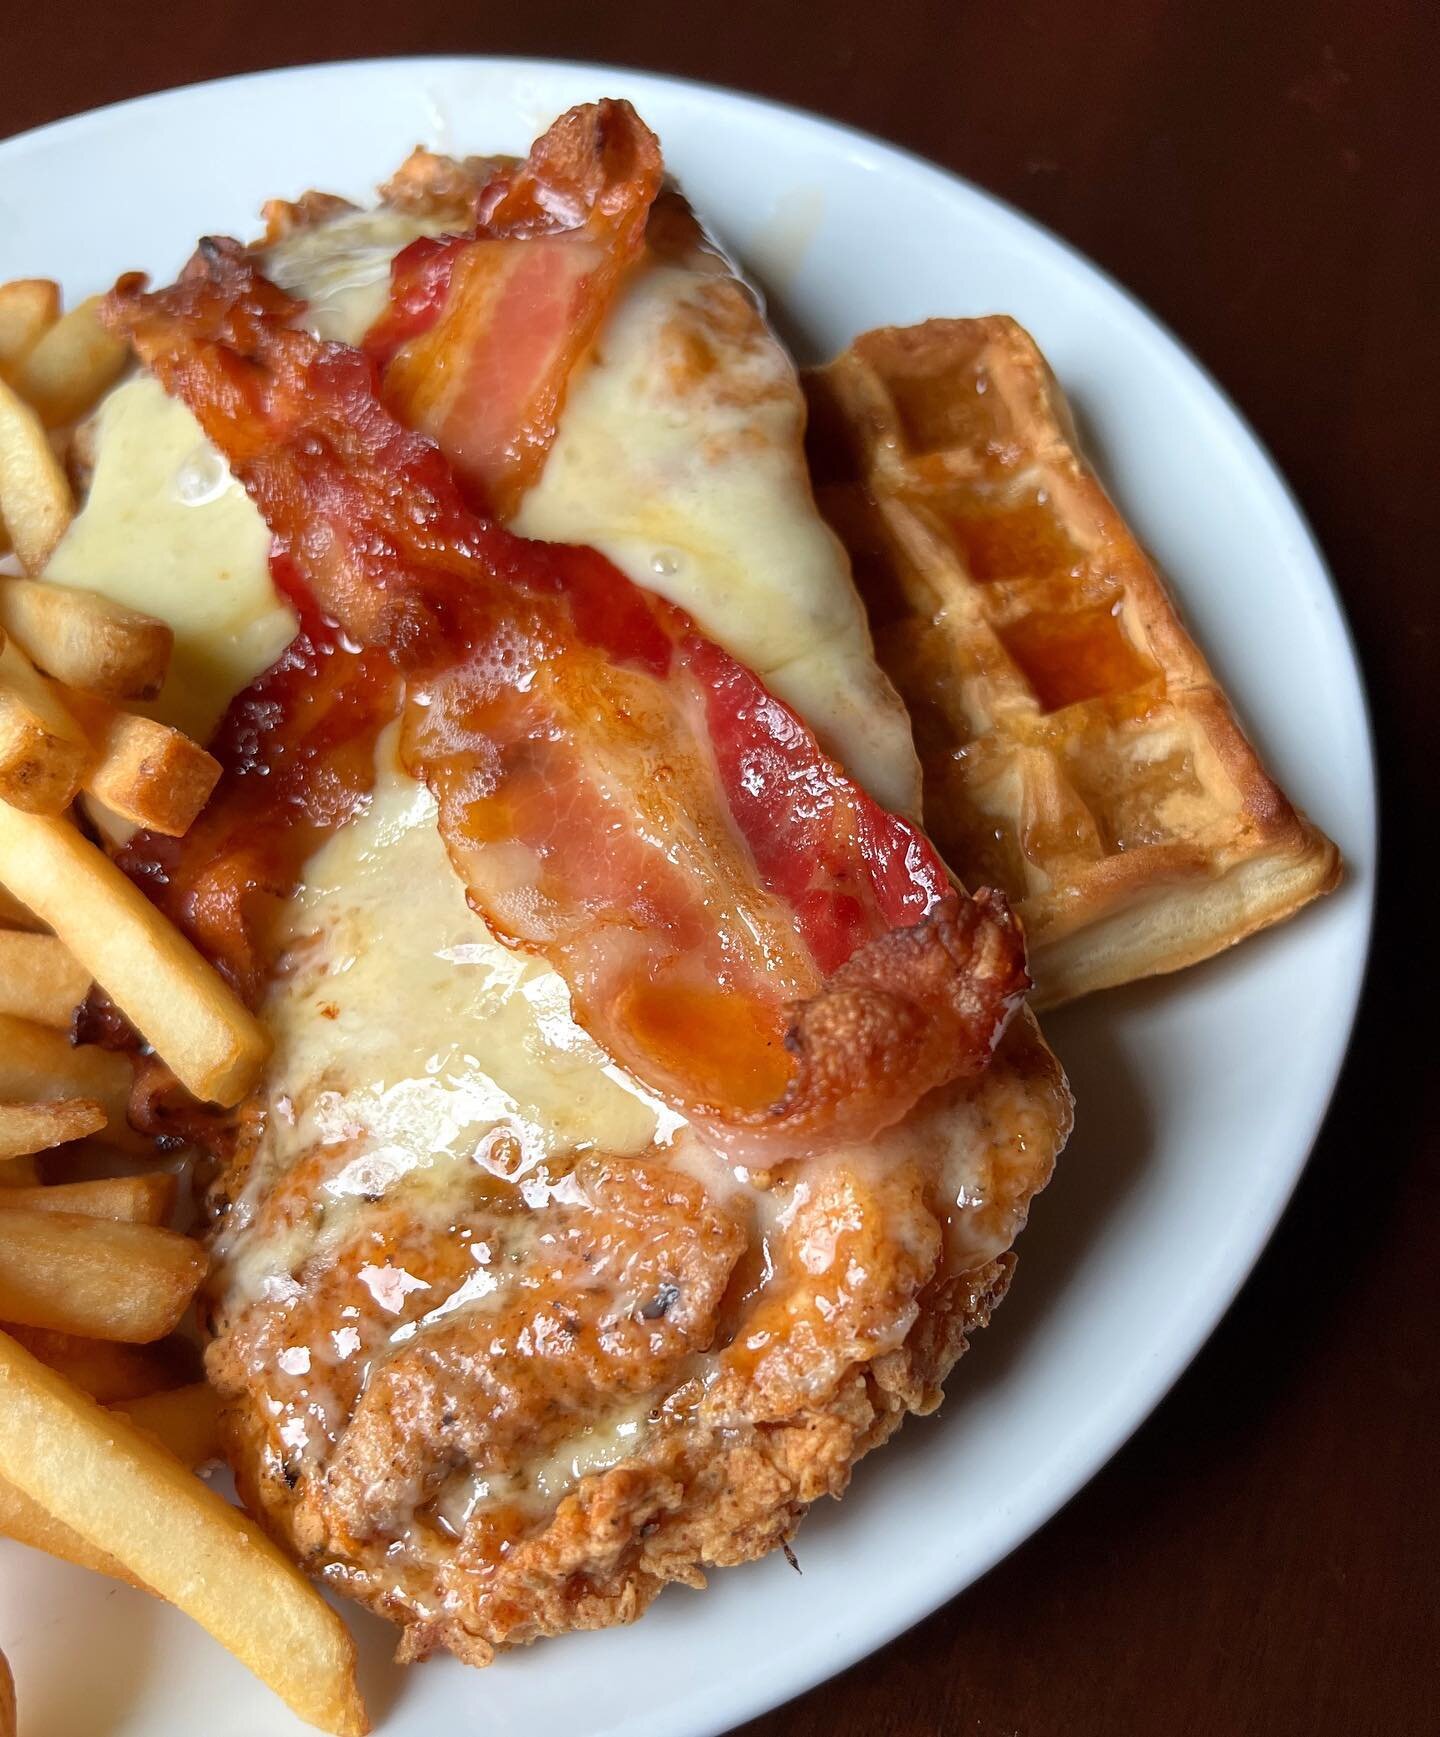 Suitable for breakfast, lunch, and dinner 🤤 on the specials this week FRIED CHICKEN &amp; WAFFLE seasoned fried chicken breast, bacon, cheddar cheese, waffle; hot honey drizzle, maple drizzle served with fries